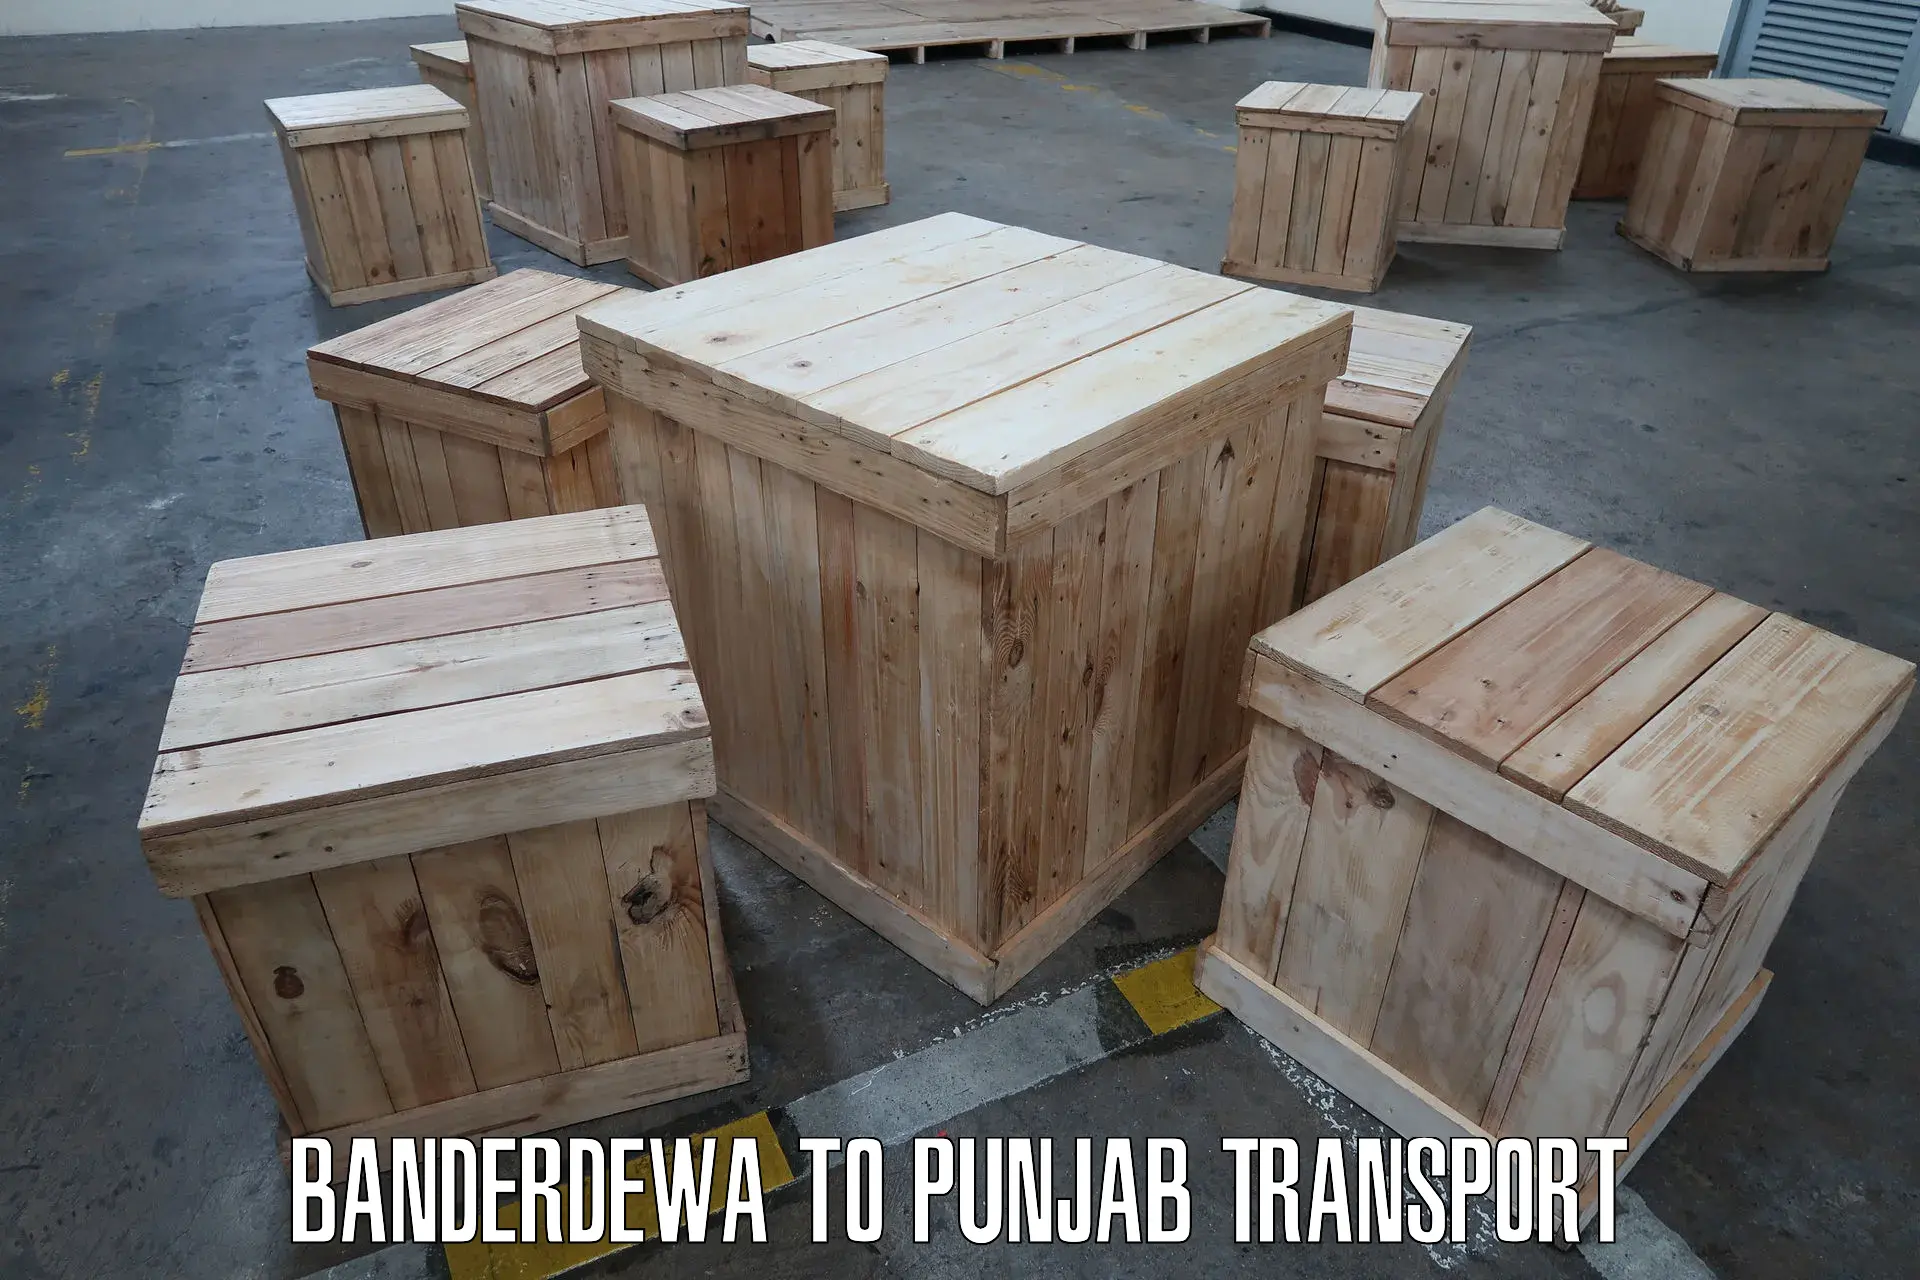 Part load transport service in India Banderdewa to Pathankot